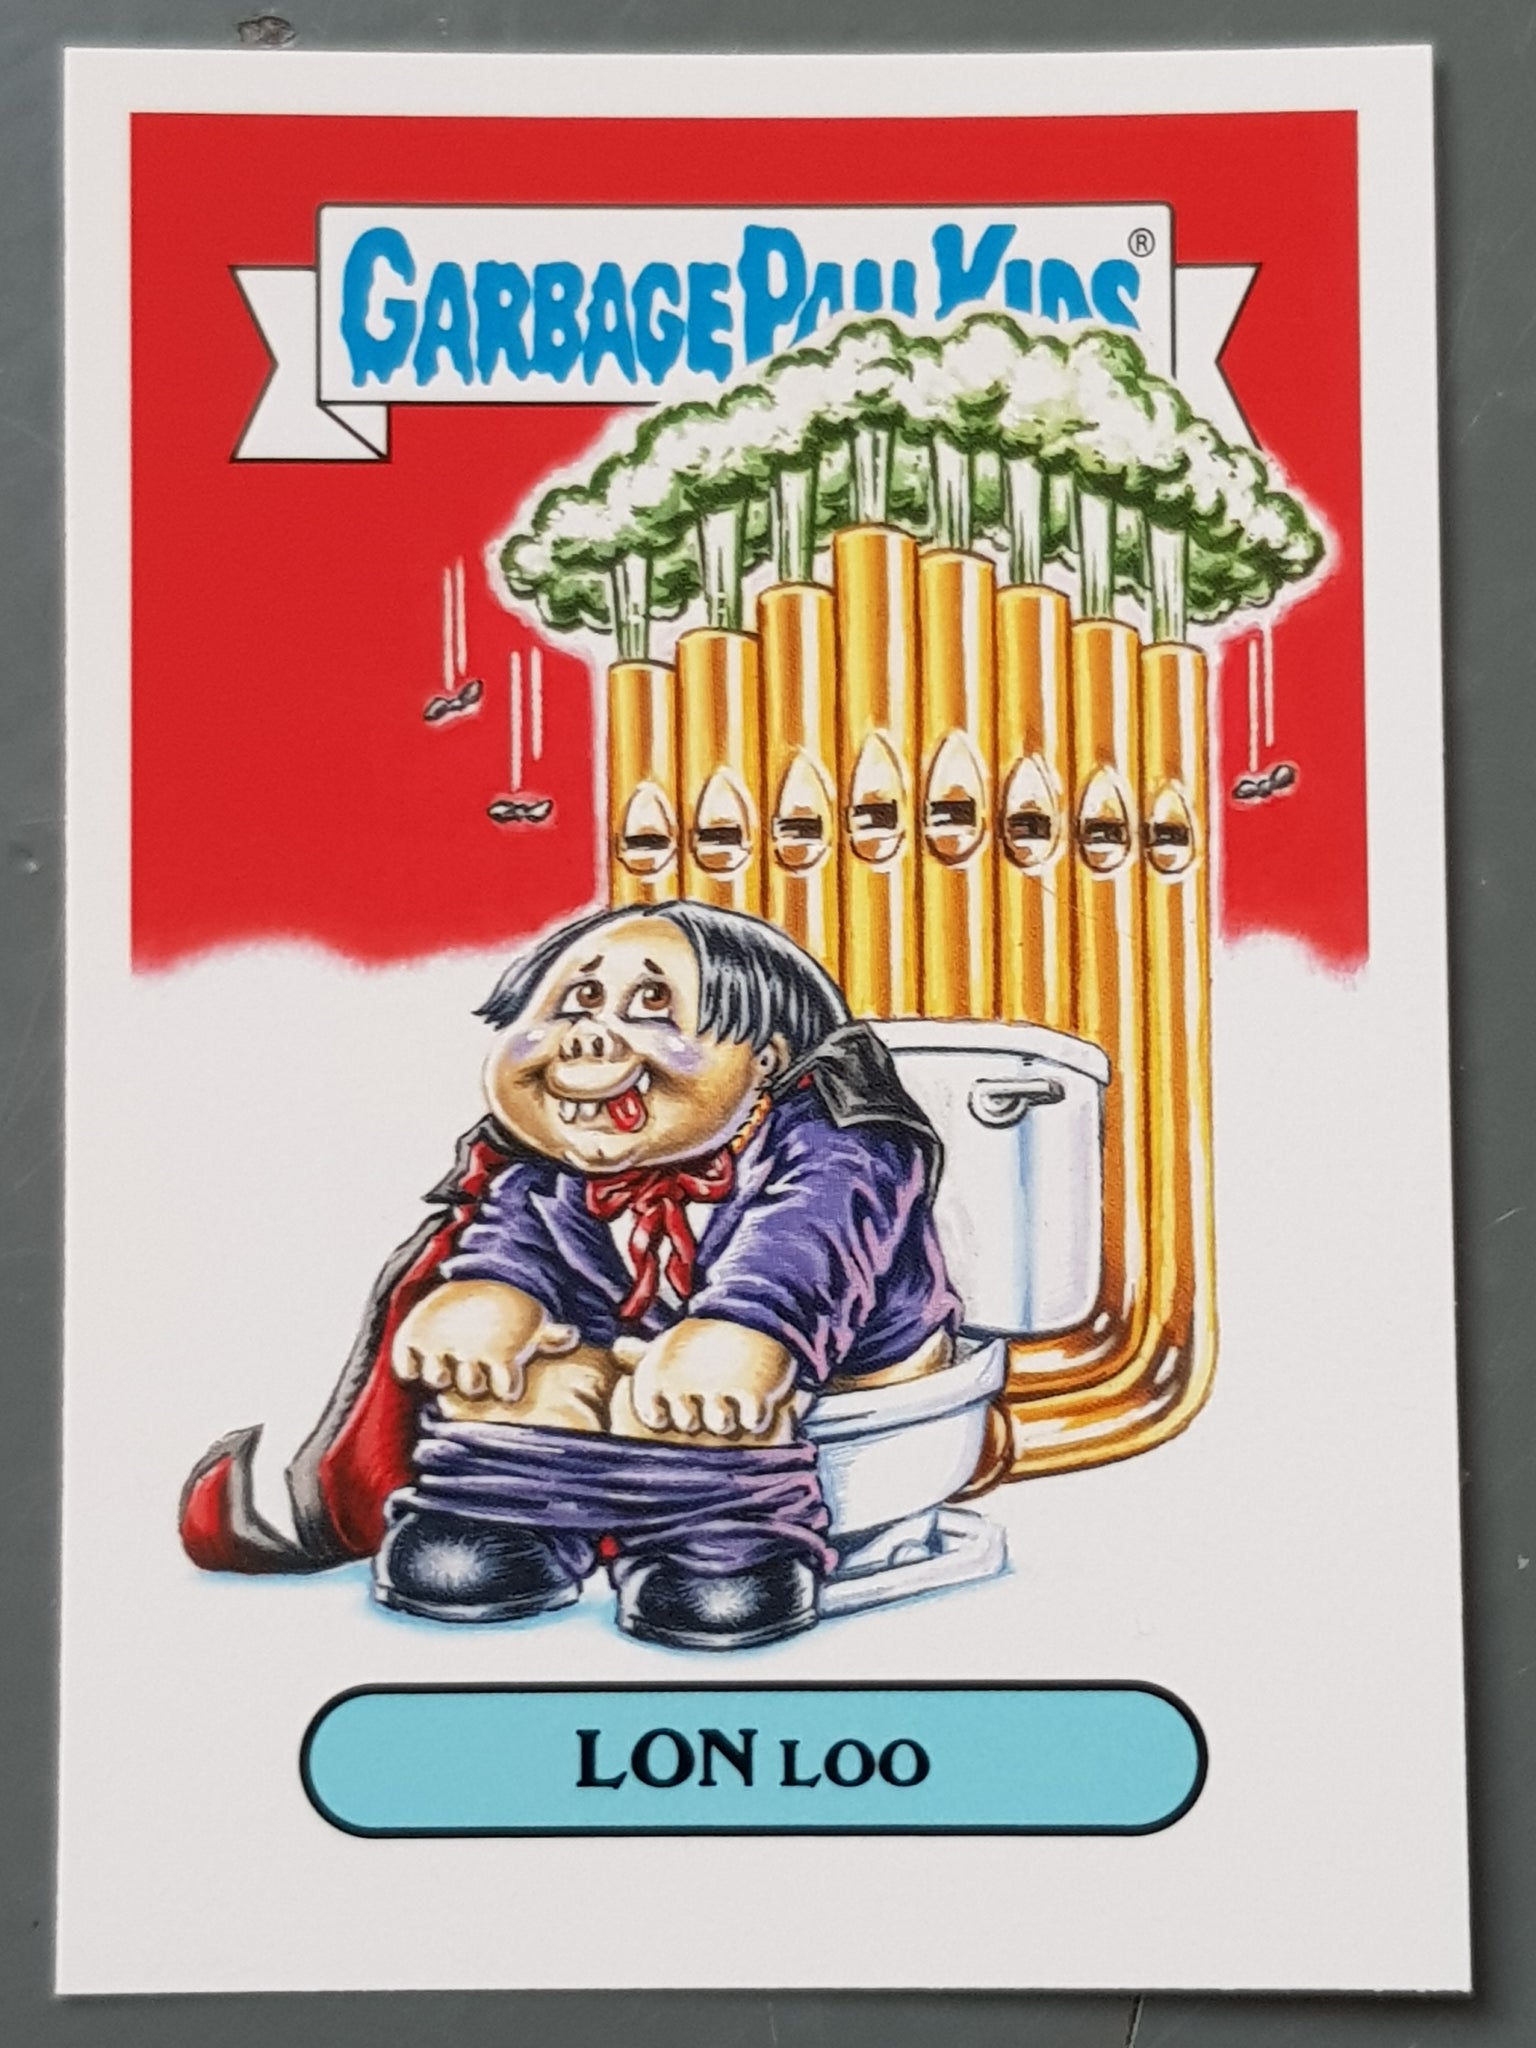 Garbage Pail Kids Oh the Horror-Ible Classic Film Monster #3a - Lon Loo Trading Card